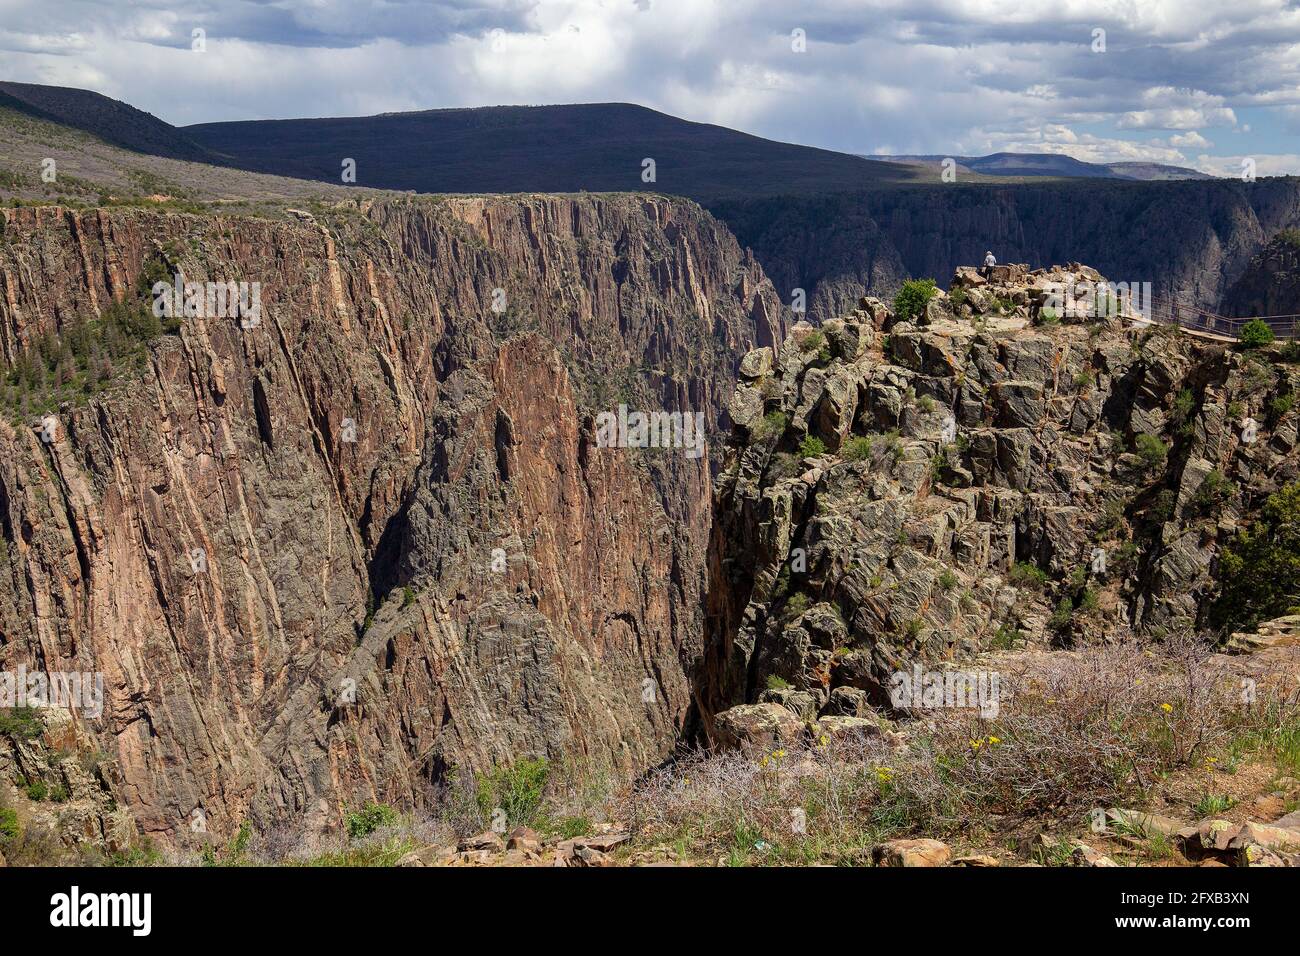 Black Canyon of the Gunnison National Park is an American national park located in western Colorado and managed by the National Park Service. Stock Photo